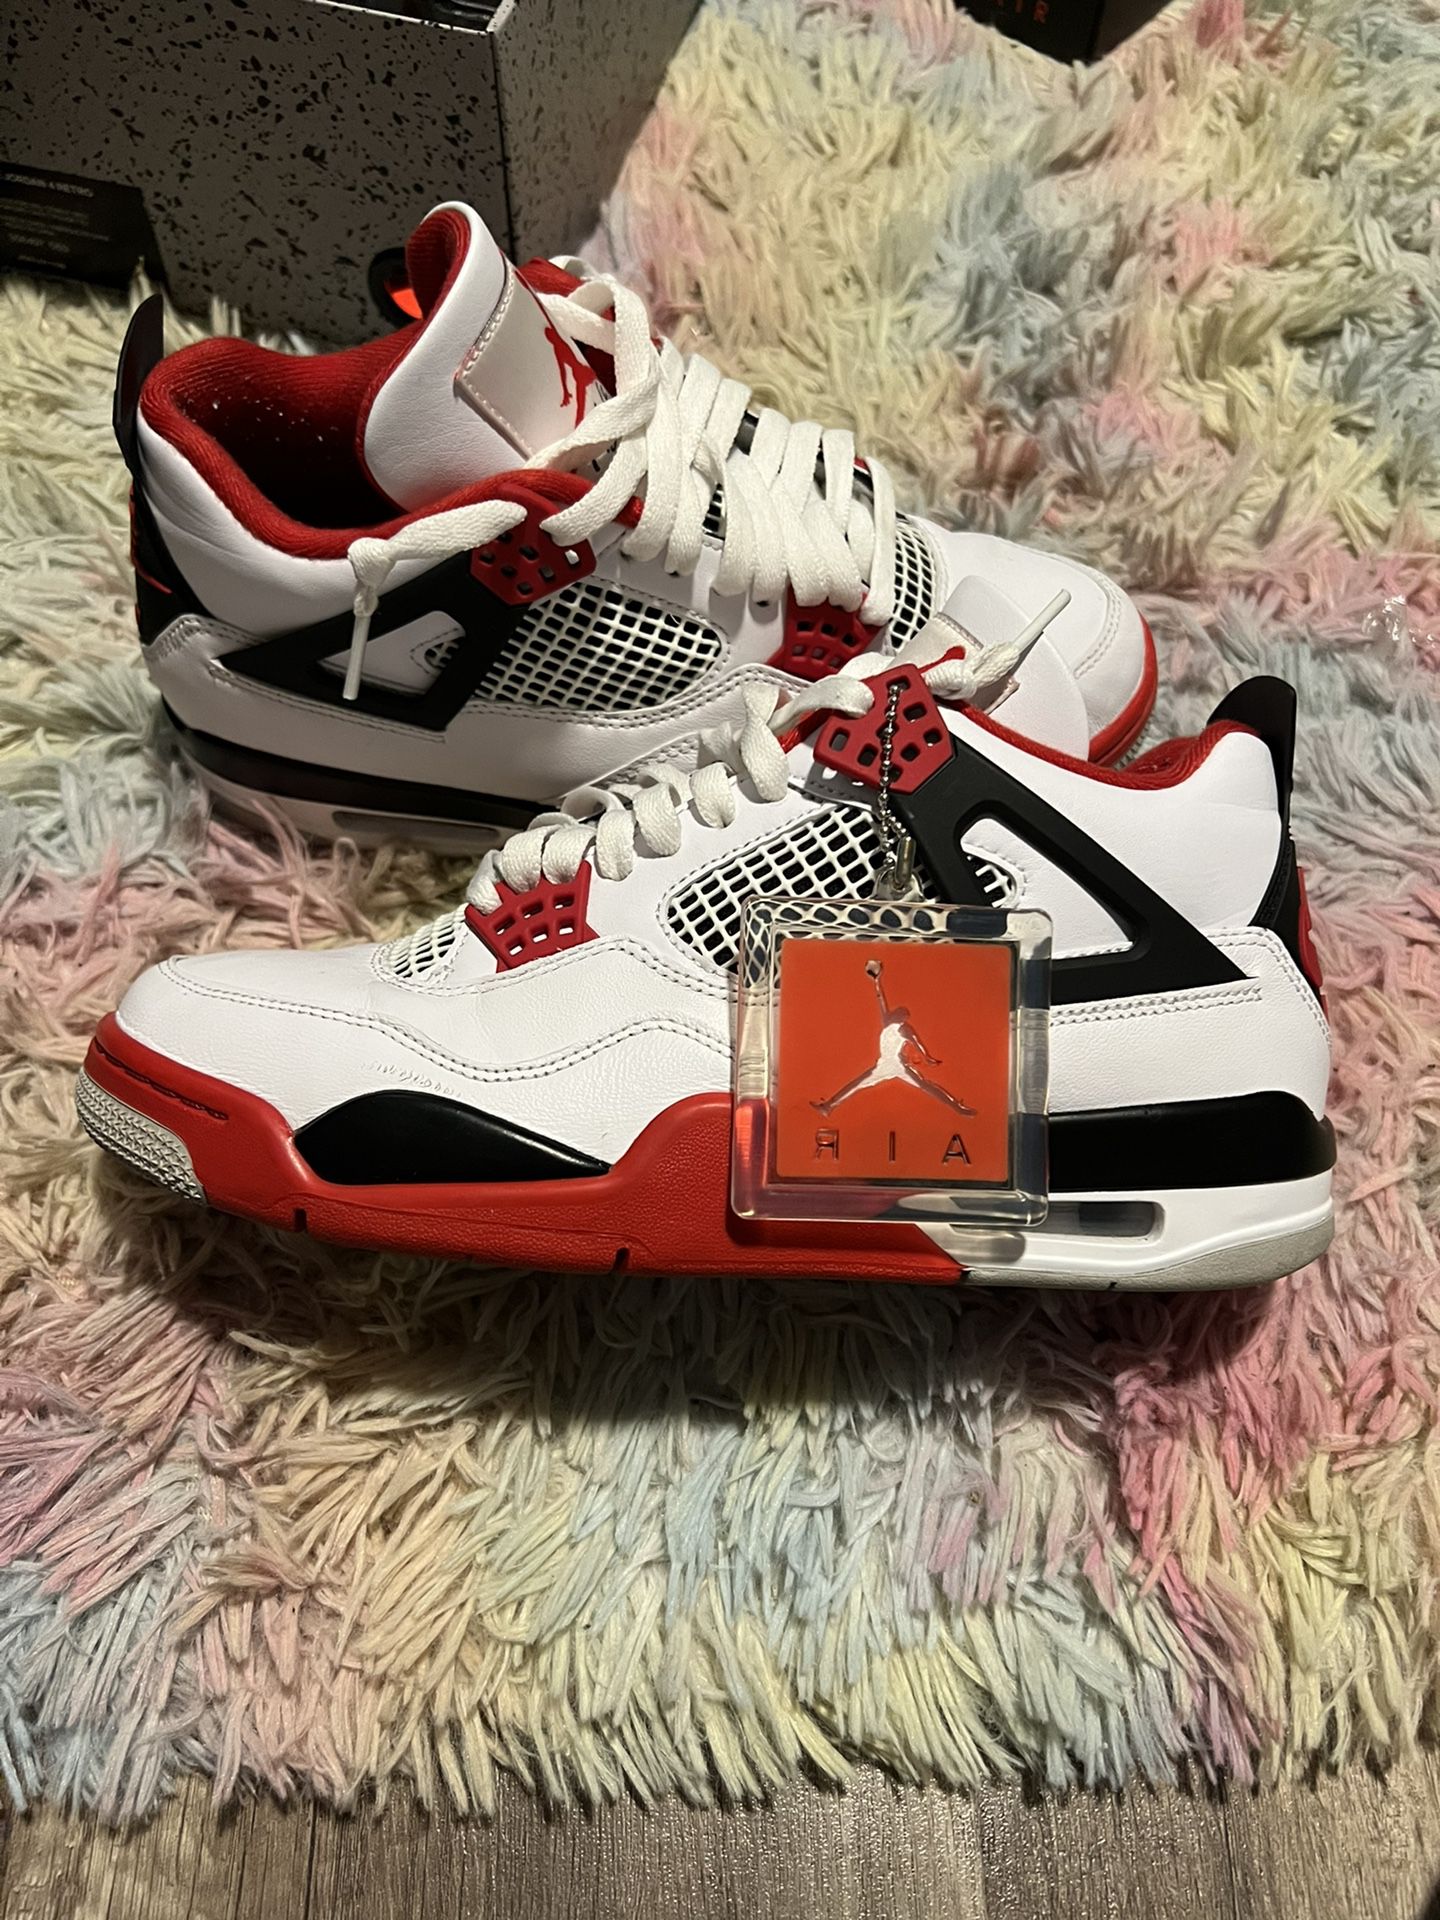 Fire Red 4 Size 8.5  Men